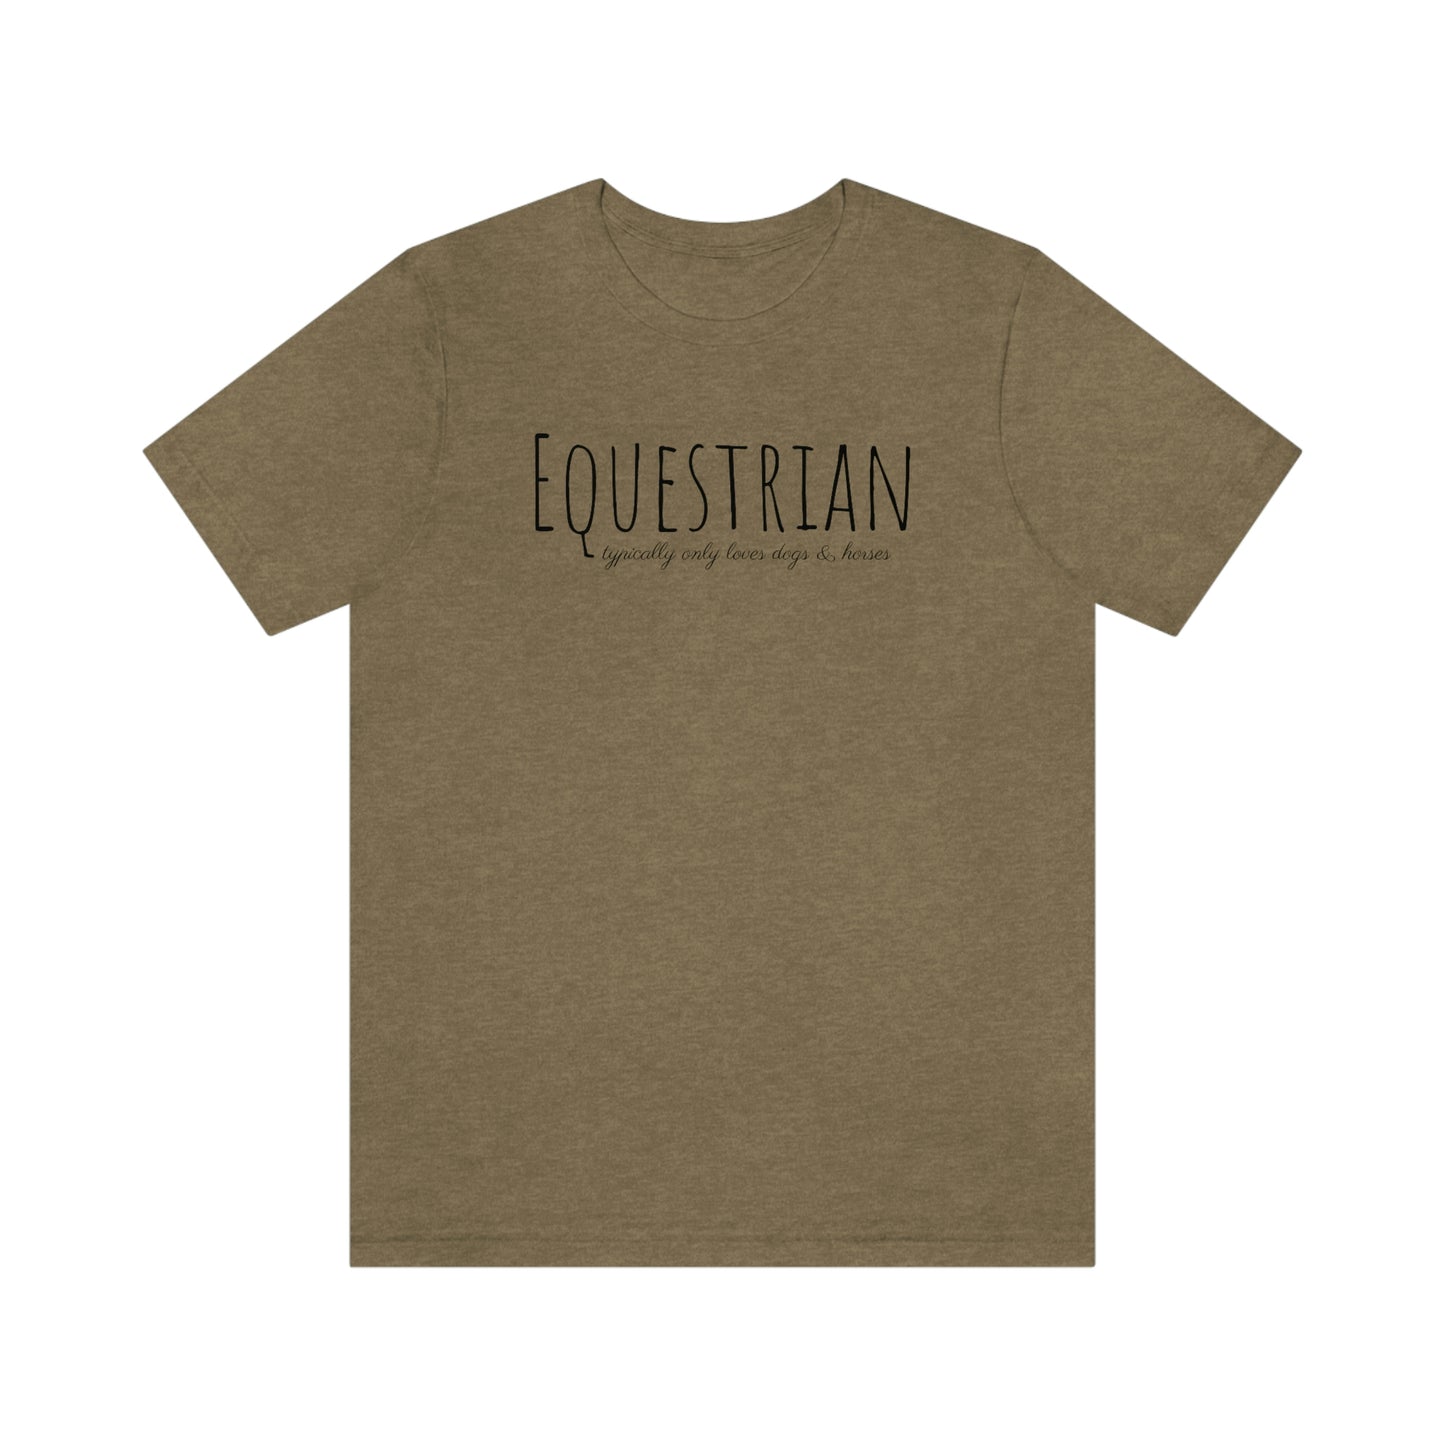 Shirt - Equestrian, typically only loves dogs & horses